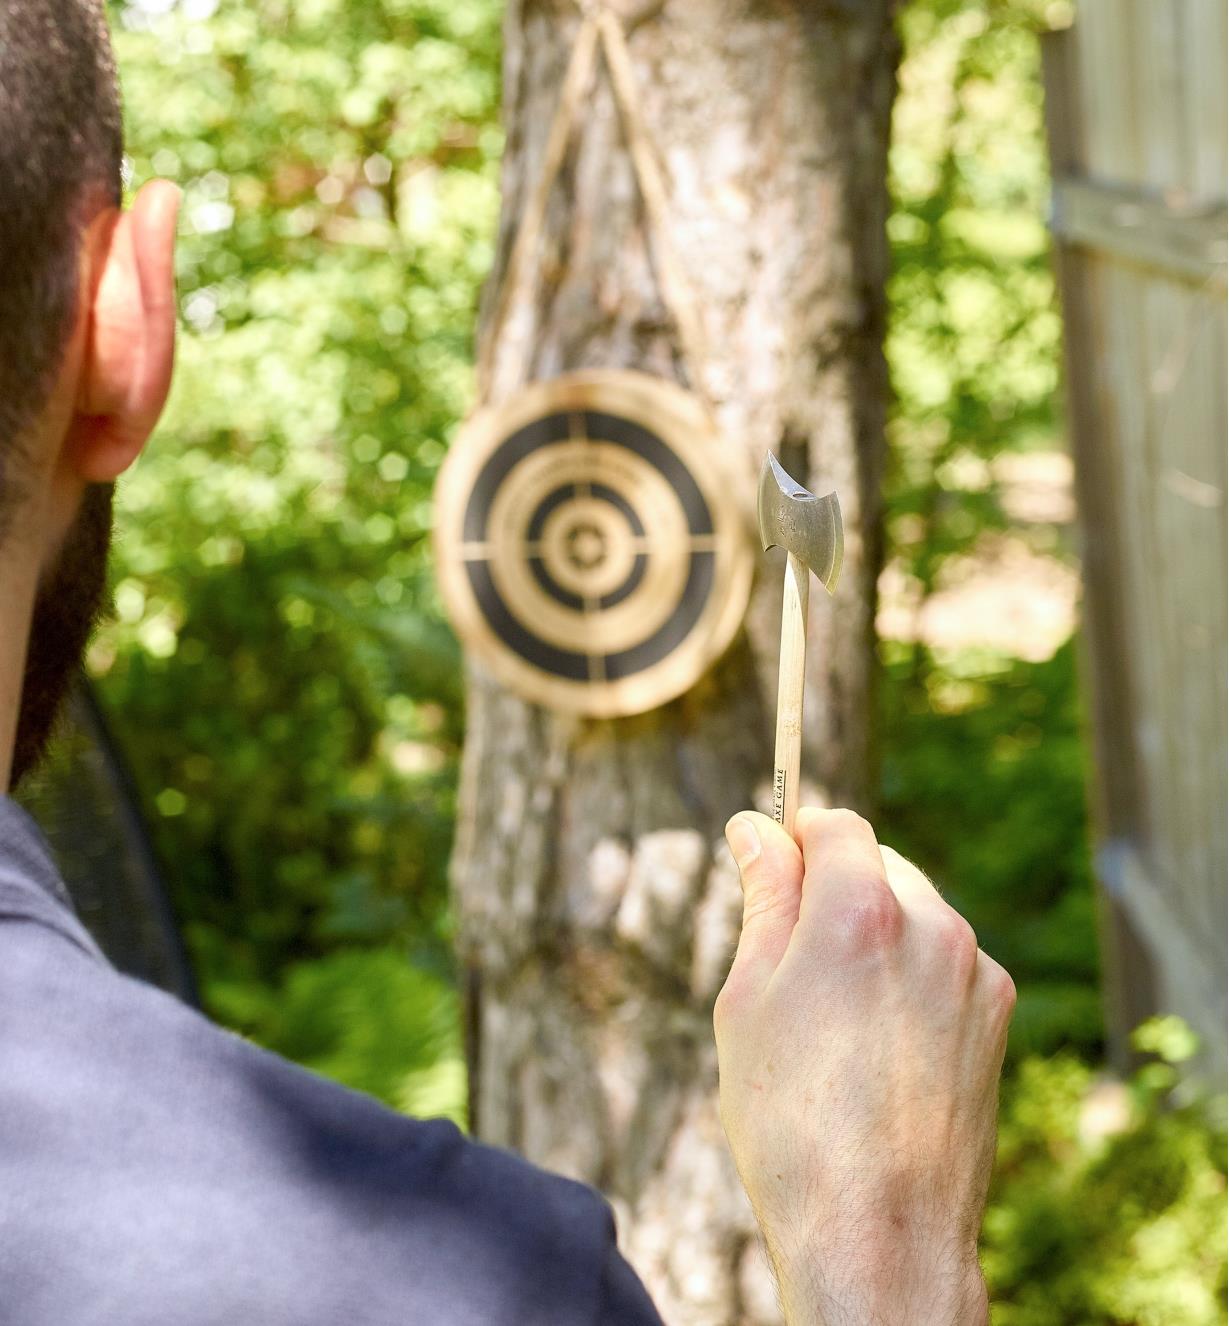 A man playing the mini axe throwing game takes aim at the wooden target